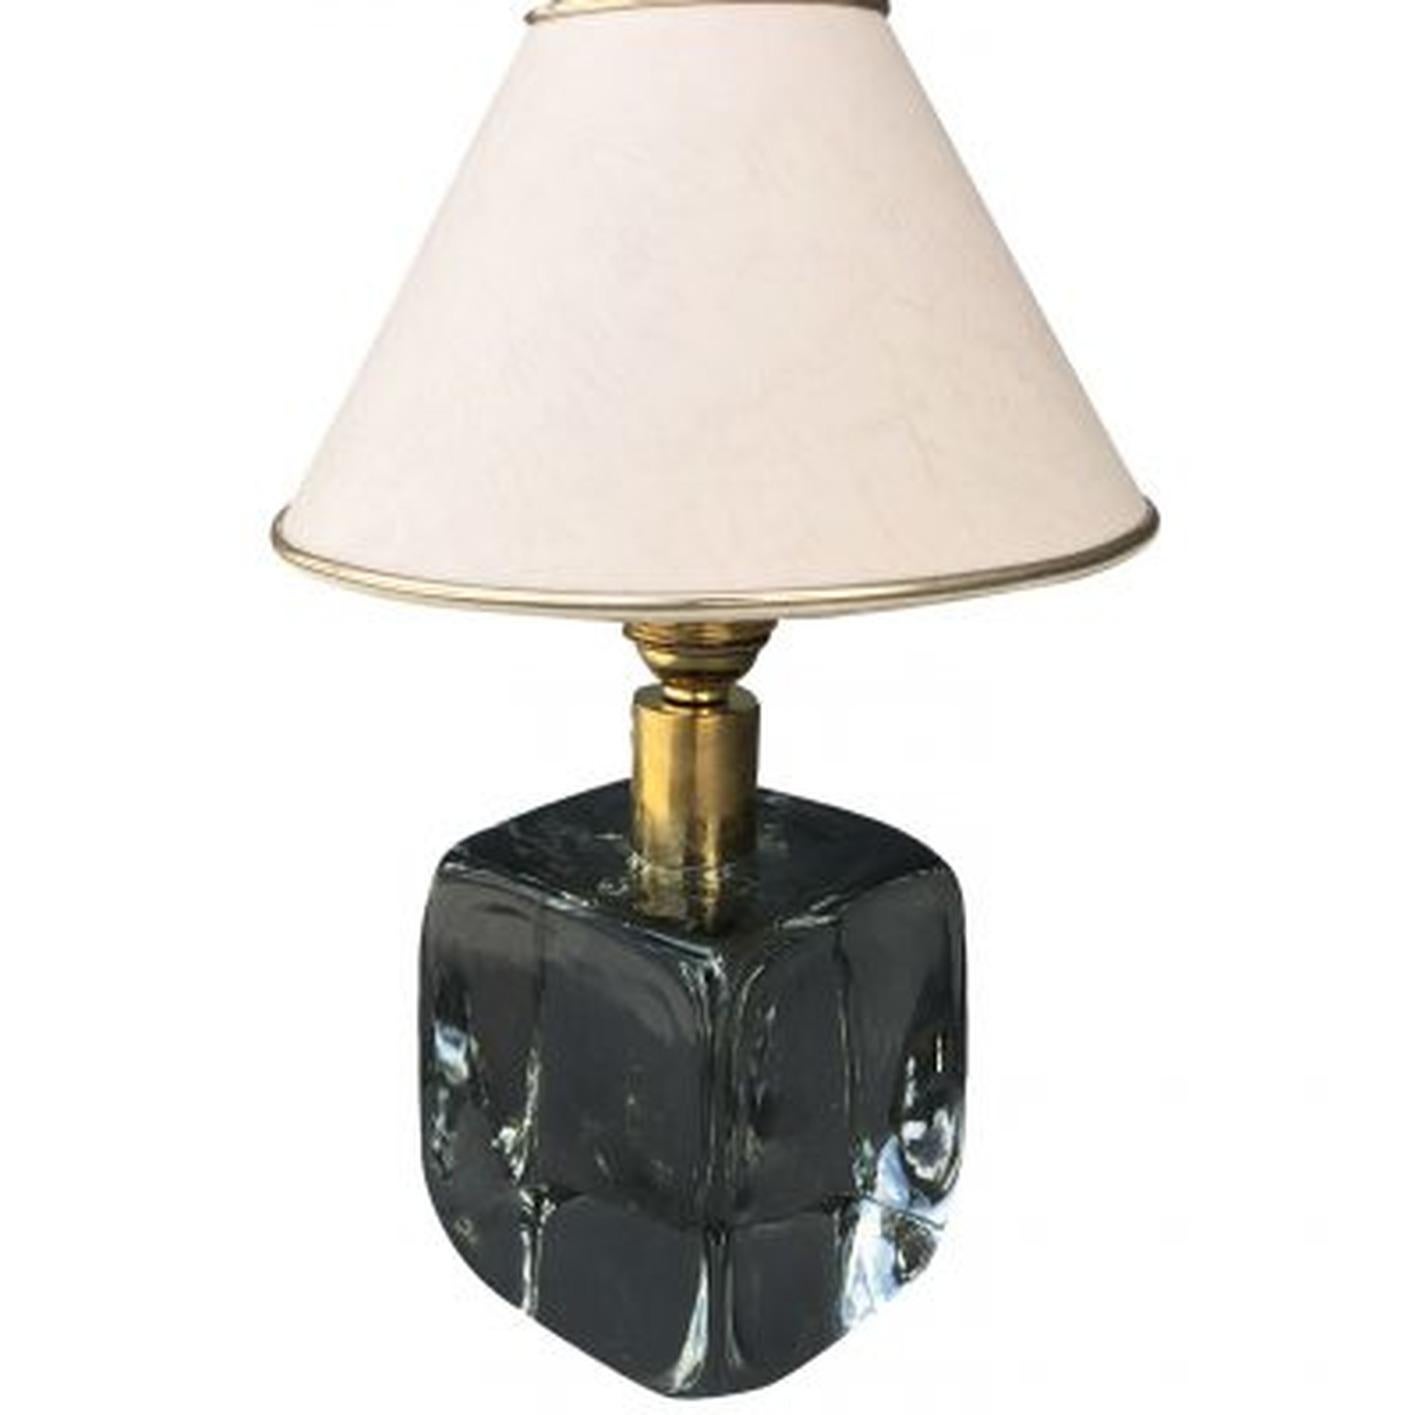 A midcentury table lamp made out of crystal glass and brass, produced by Svenskt Tenn in Sweden, designed by Josef Frank. Wear consistent with age and use, circa 1960, Sweden.

Measures: Base 4.5” H x 4.20” W x 4.20” D

Shade 5” H x 8.20” W